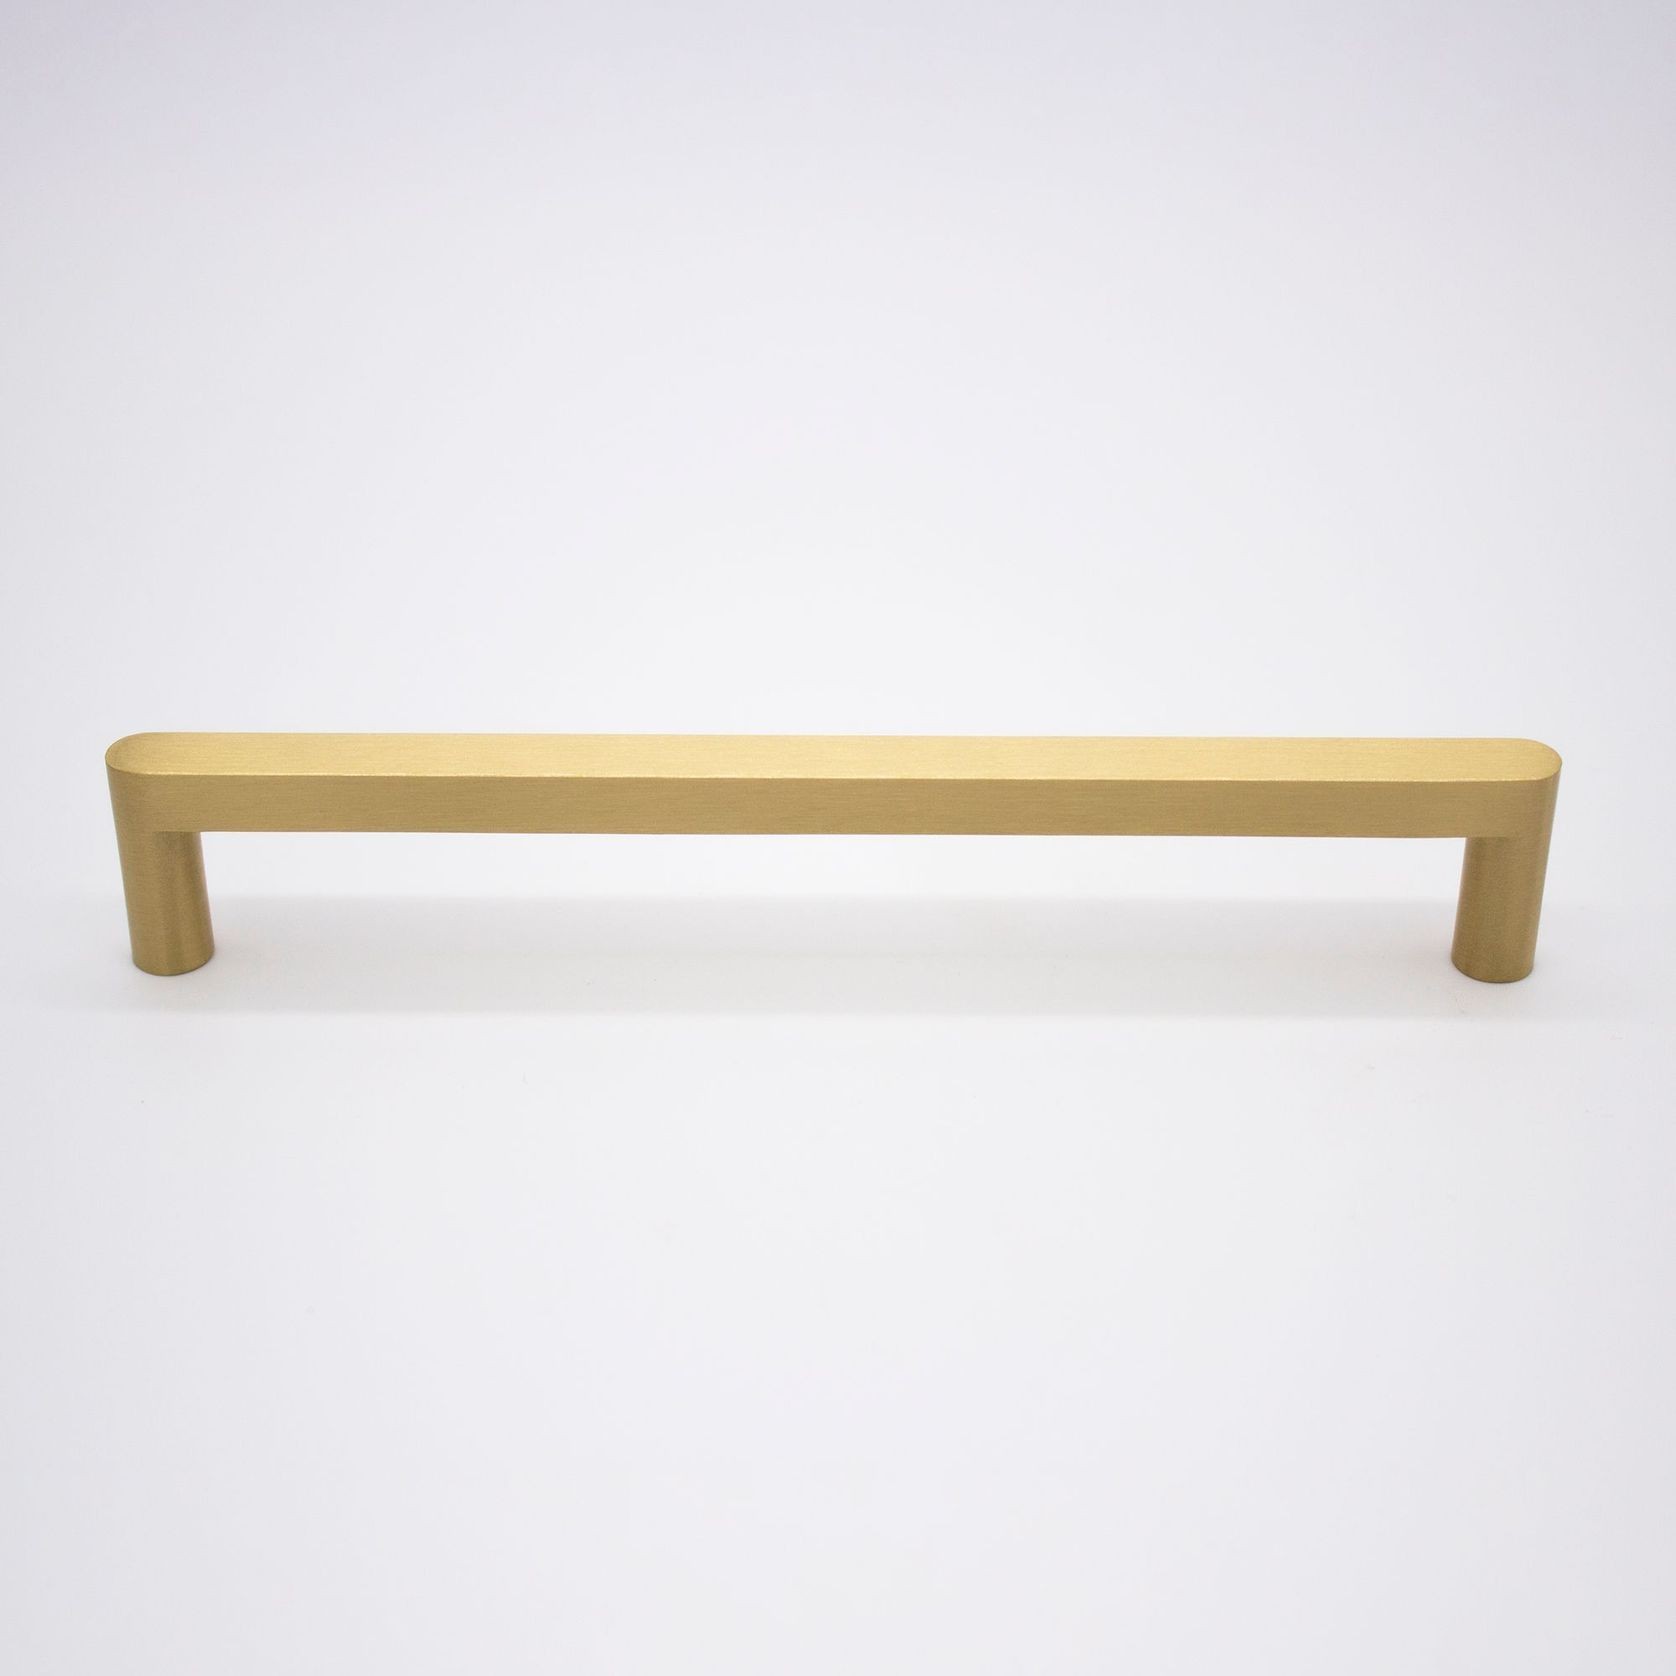 Brushed Brass Straight Profile Cabinet Pull - Clio gallery detail image